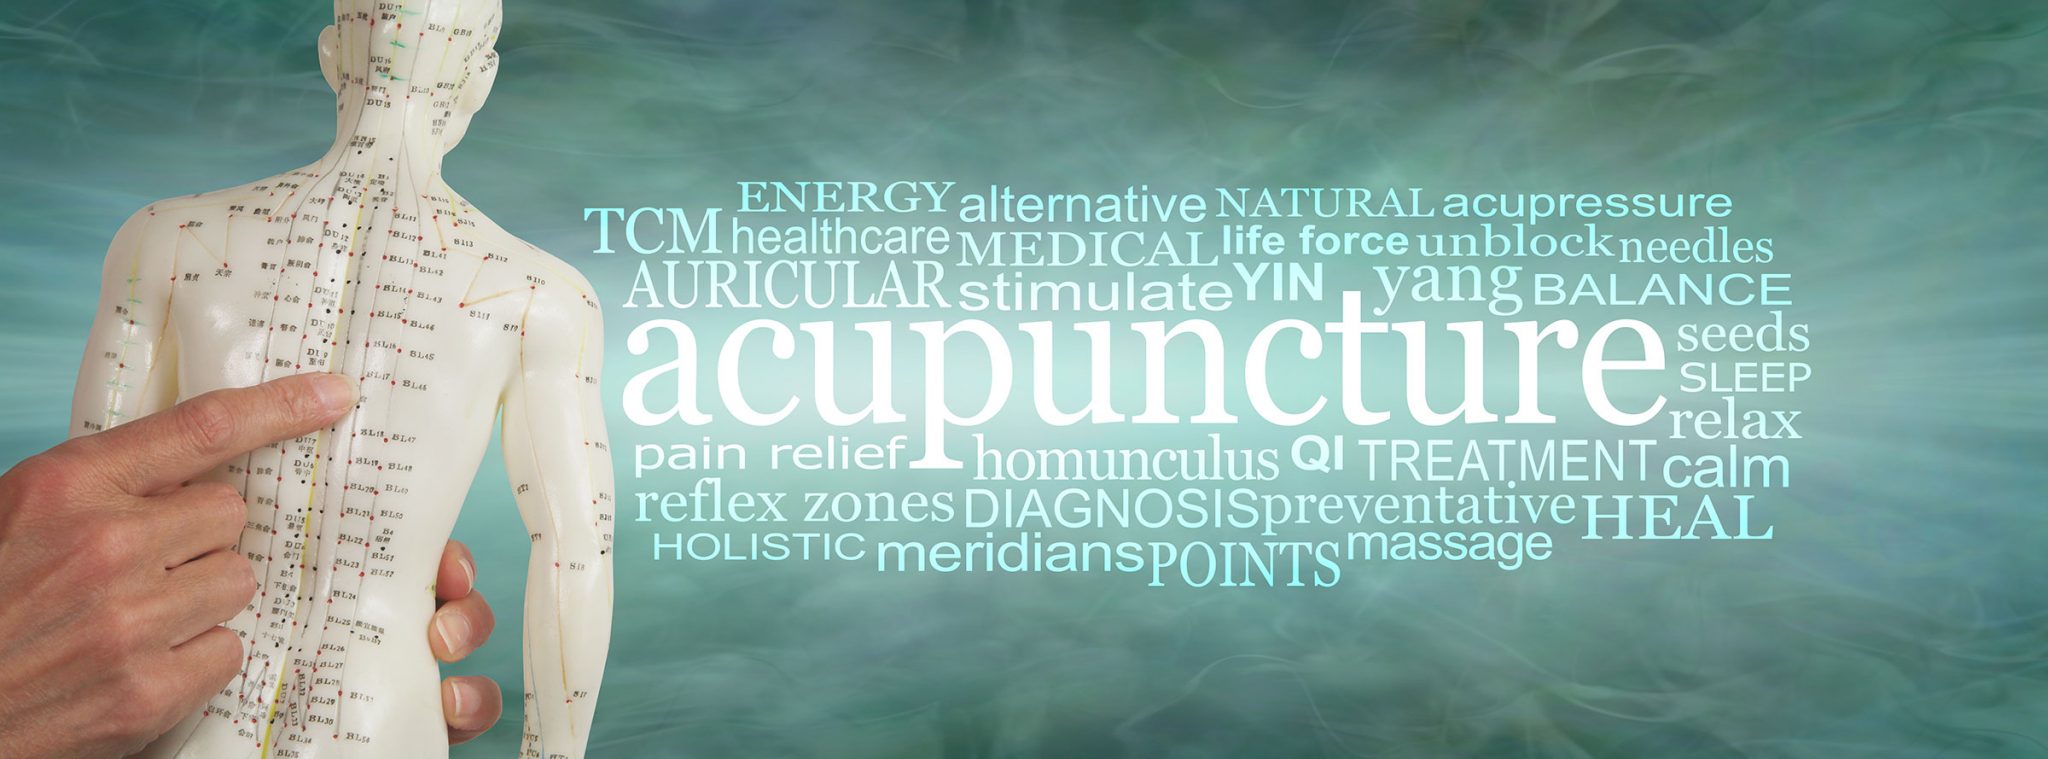 Acupuncture Word Cloud banner - hands holding an acupuncture points dummy beside an ACUPUNCTURE word cloud against a jade green background